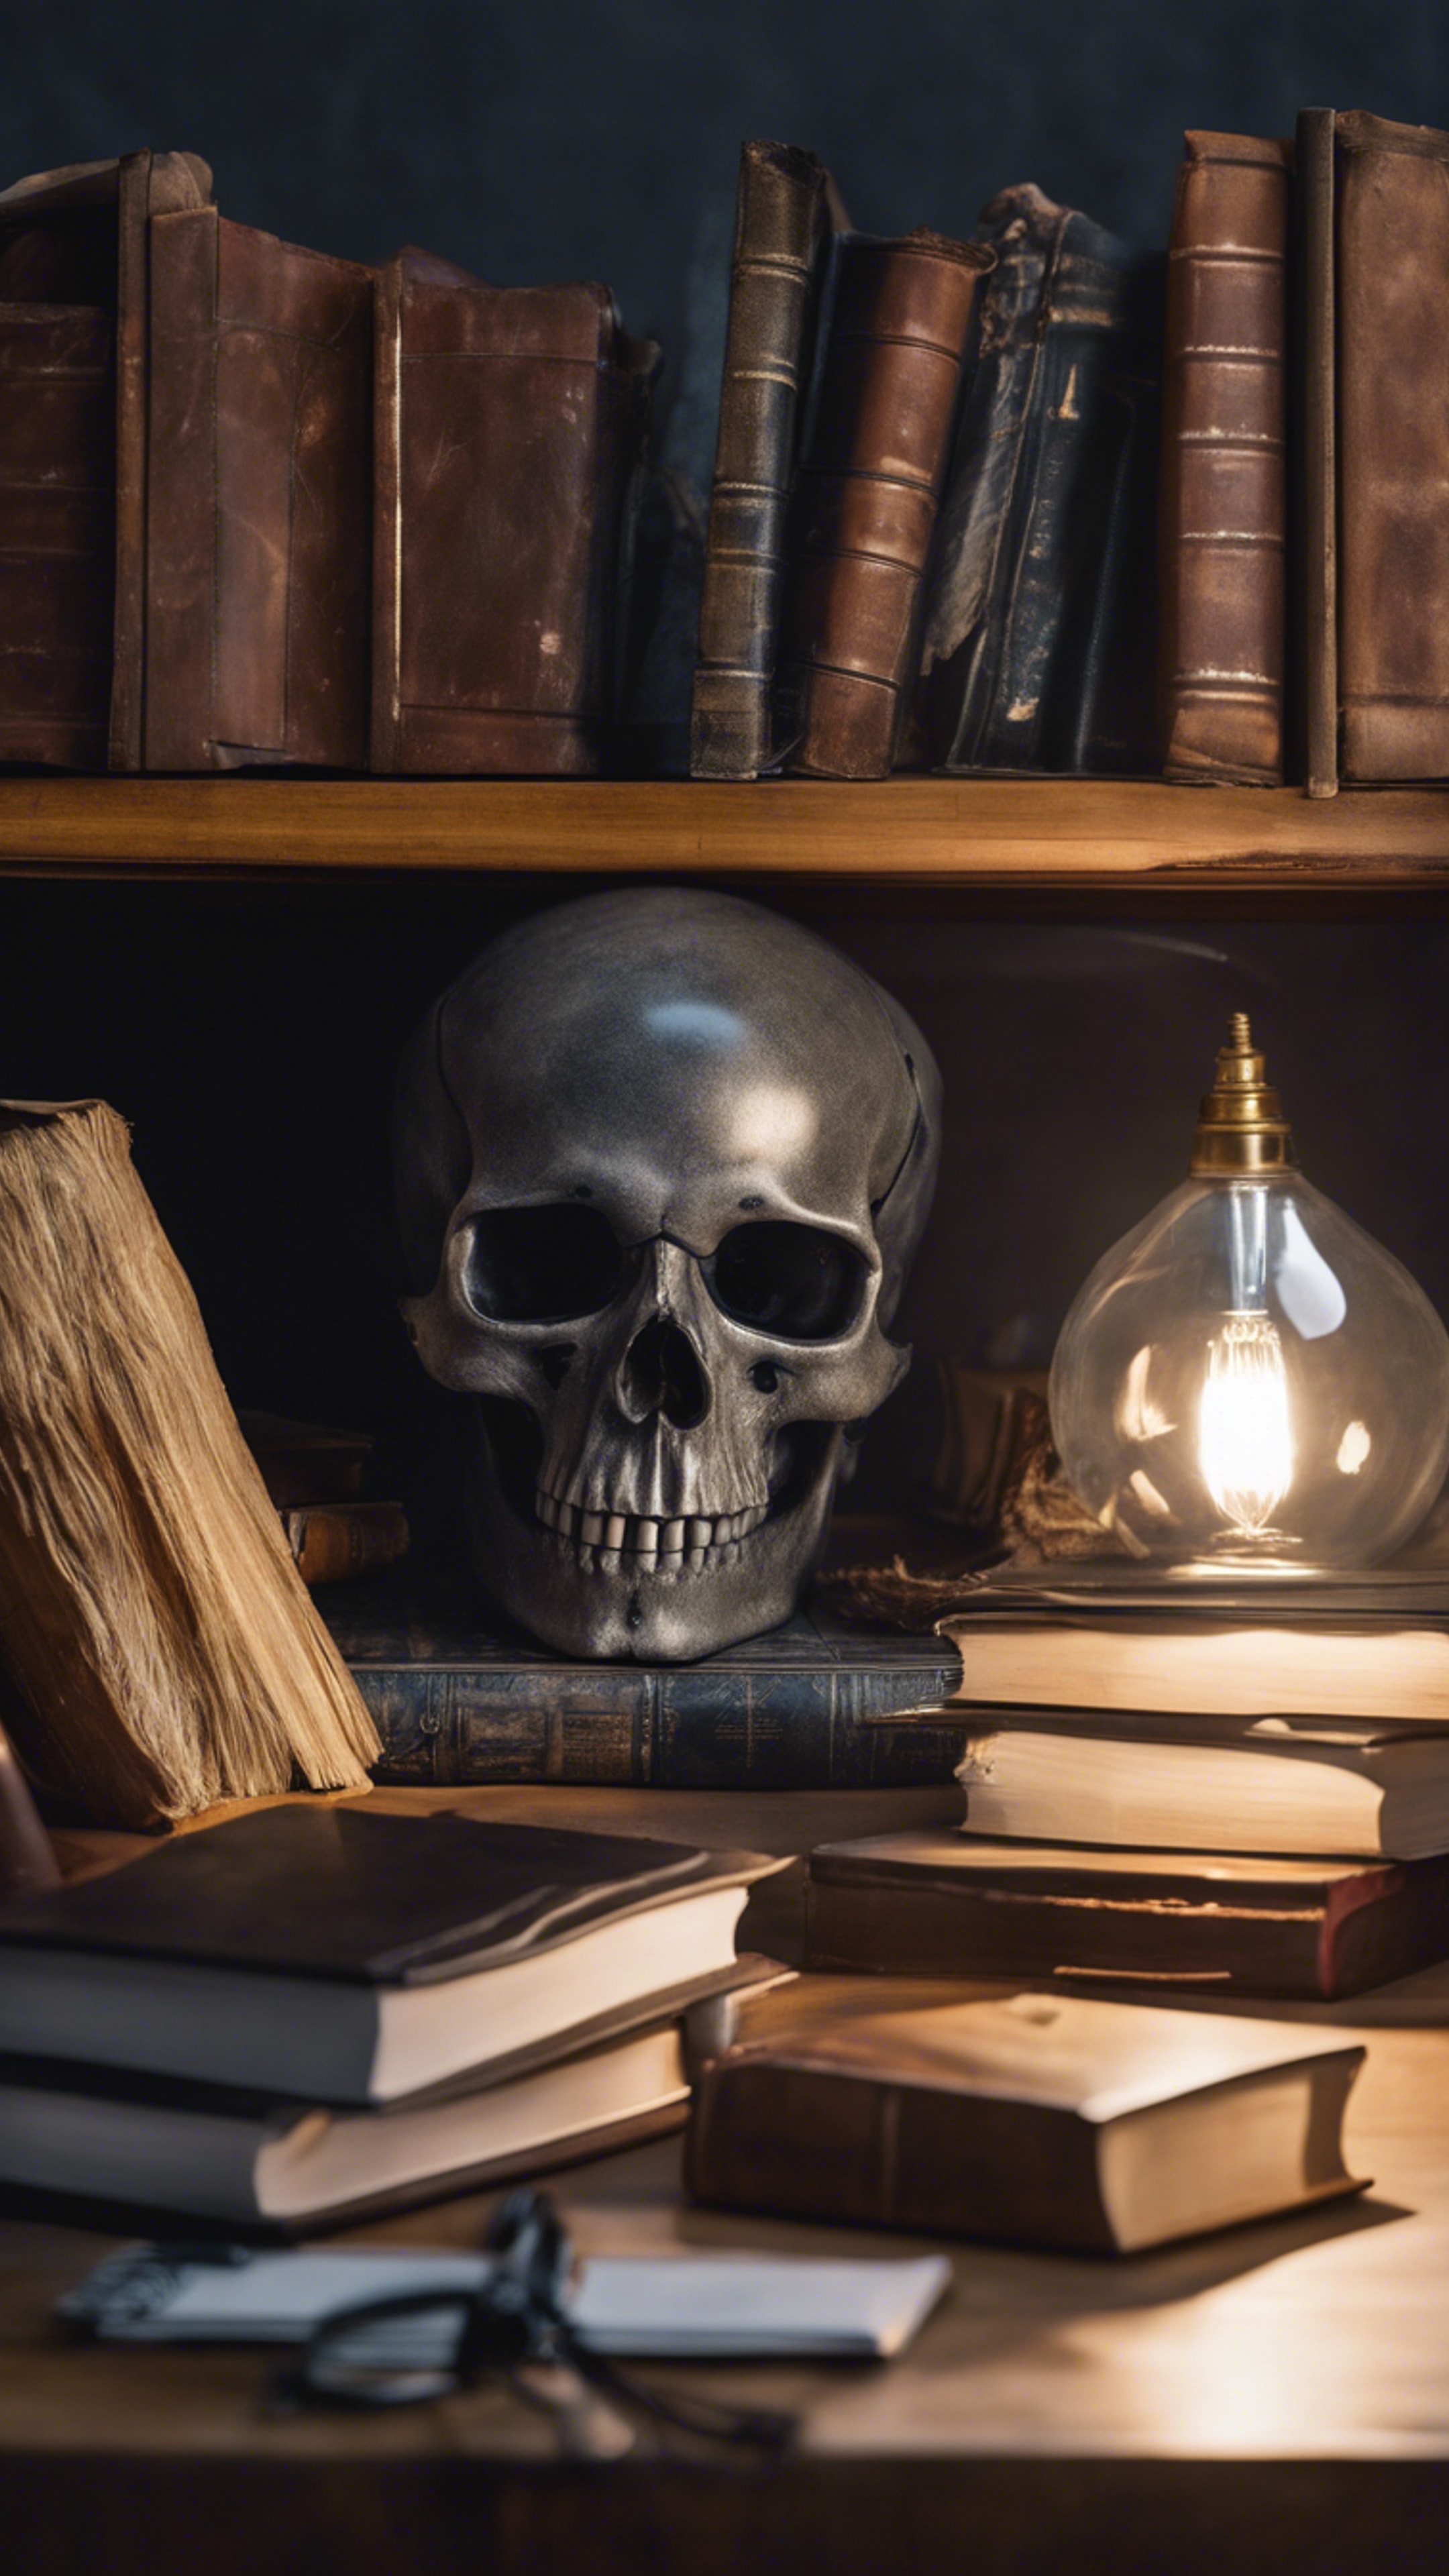 A study desk with a gray skull paperweight, surrounded by scattered books and a dimly lit lamp. Tapéta[9ada7a5adc764debb4f2]